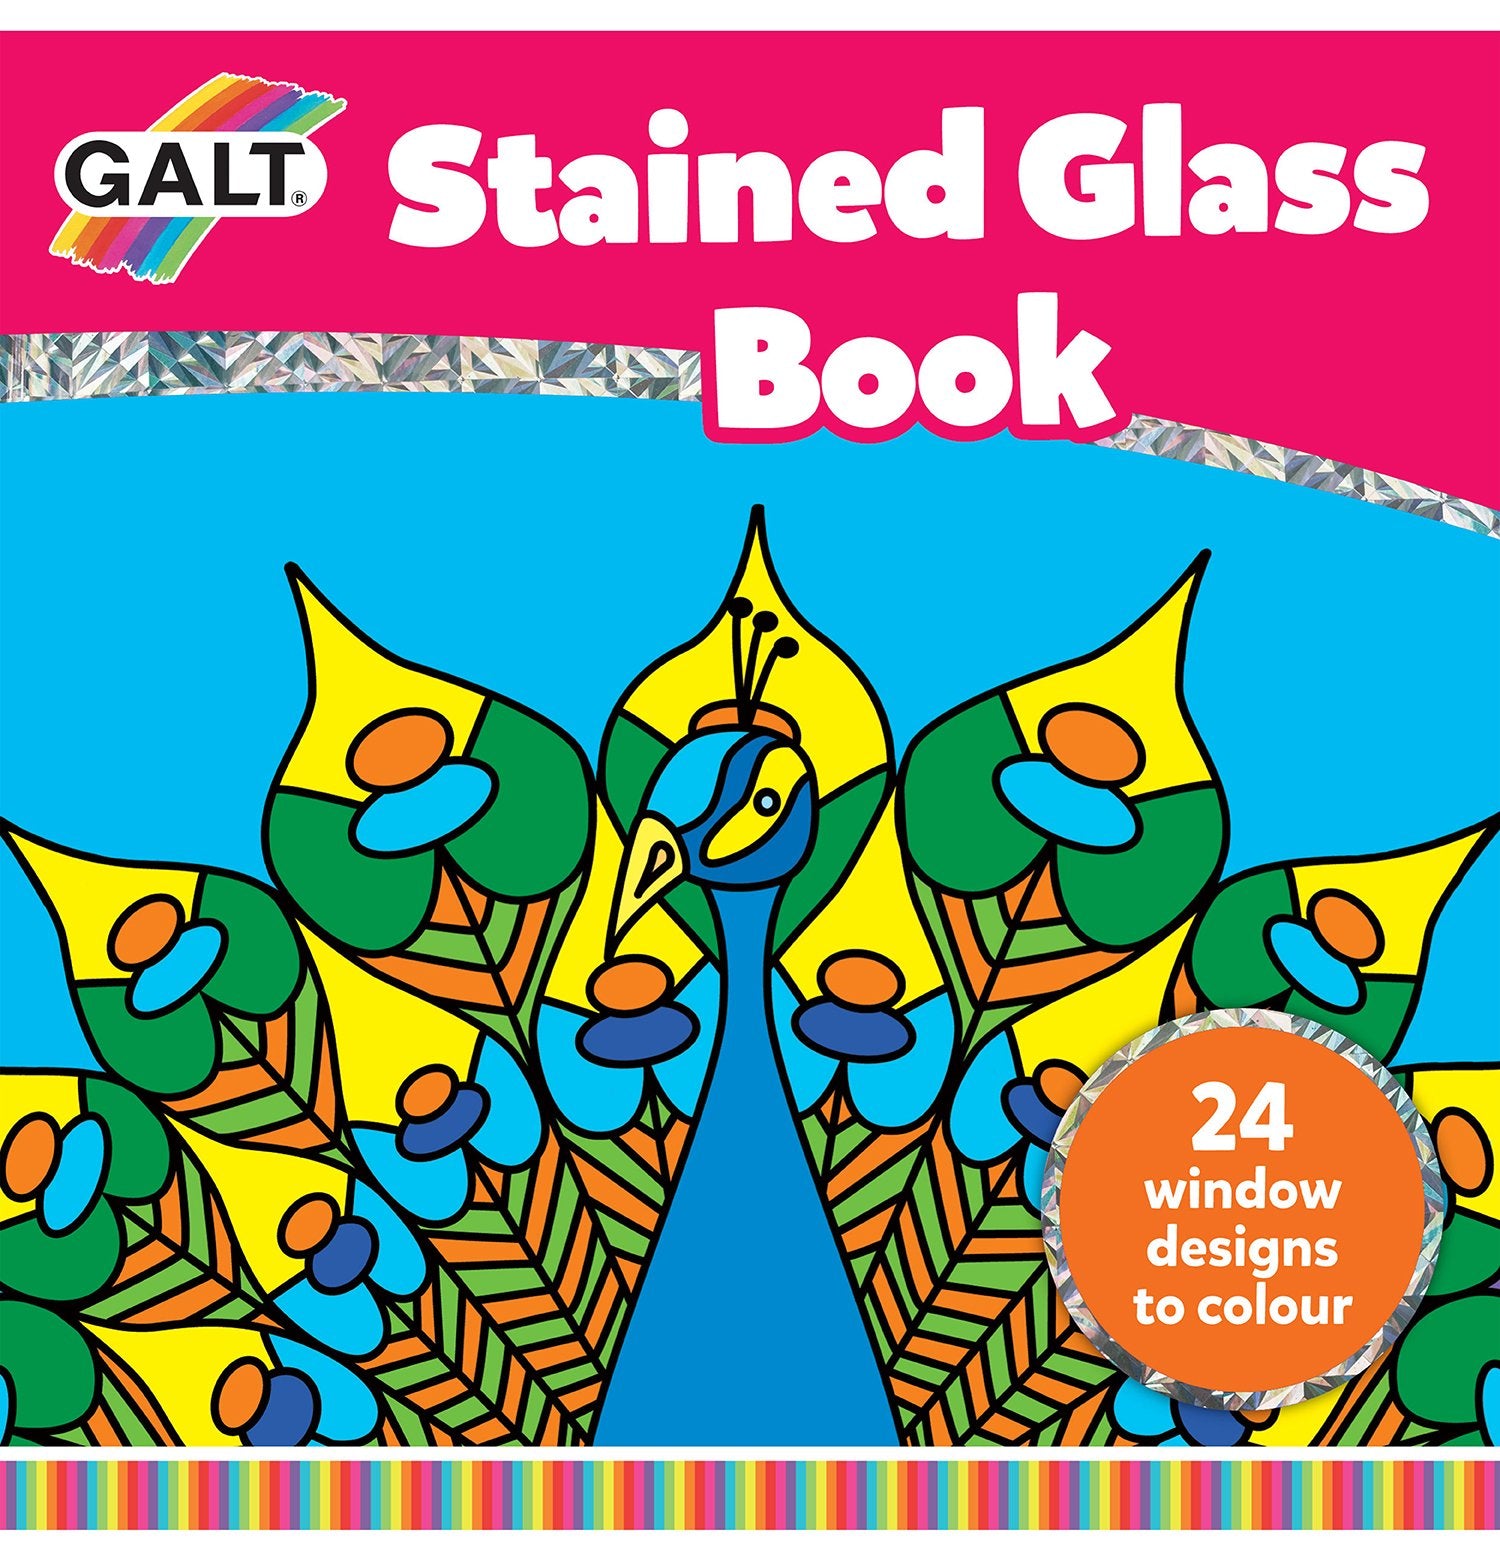 Stained Glass Book - Galt